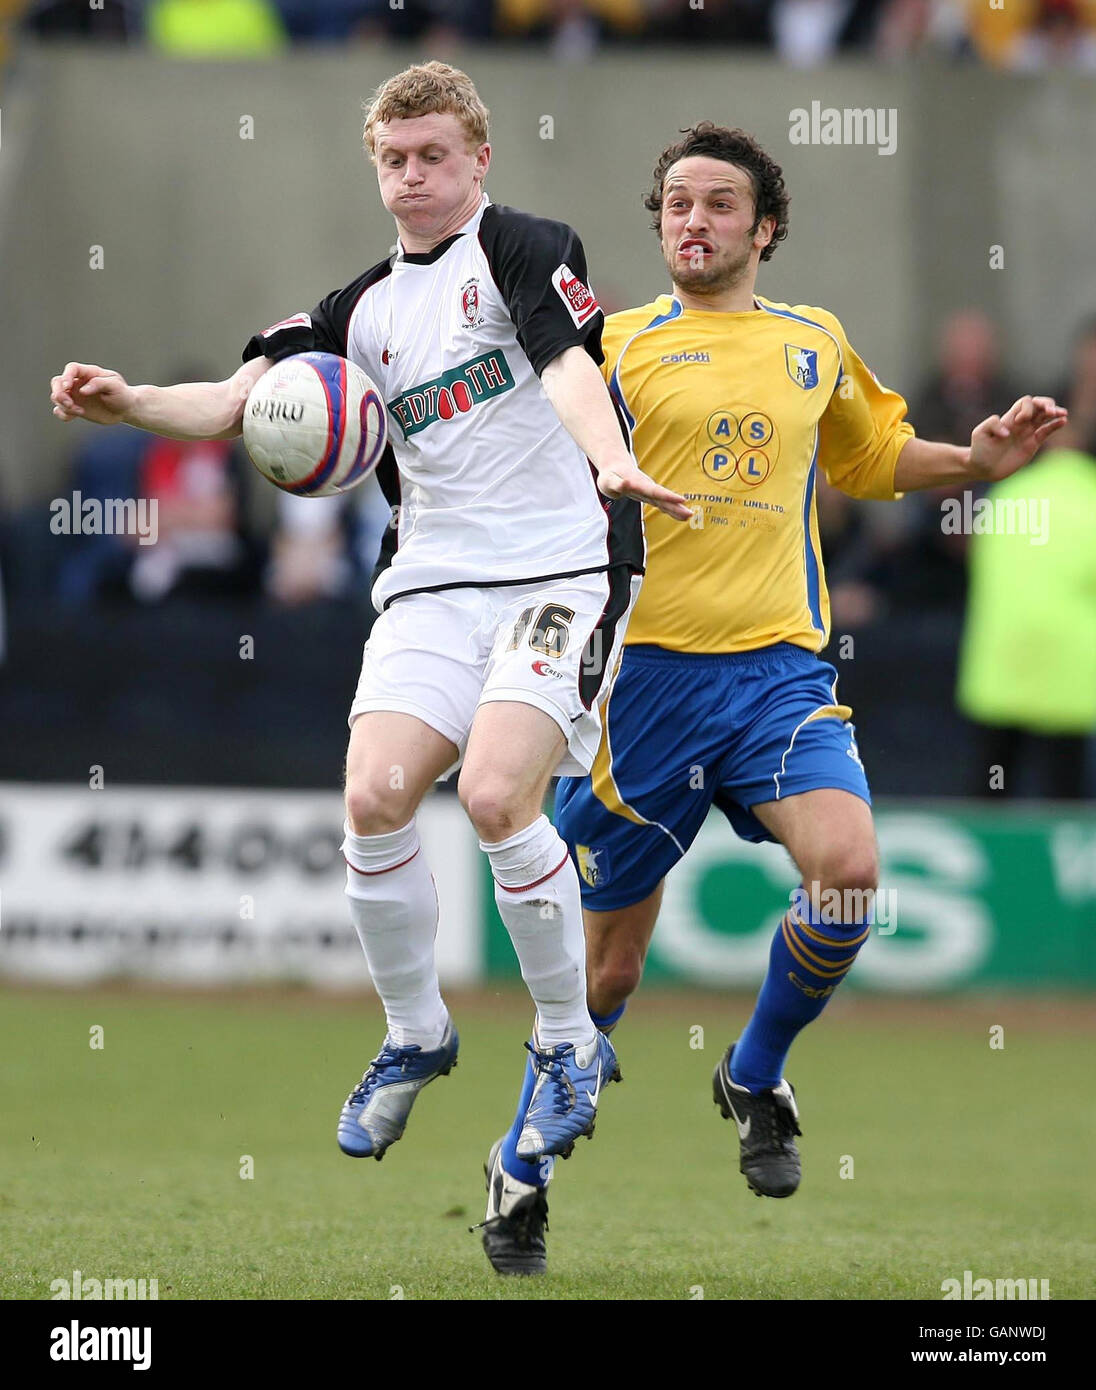 Mansfield Town's Gareth Jelleyman and Rotherham United's Jamie Yates battle for the ball during the Coca-Cola Football League Two match at Field Mill, Mansfield. Stock Photo